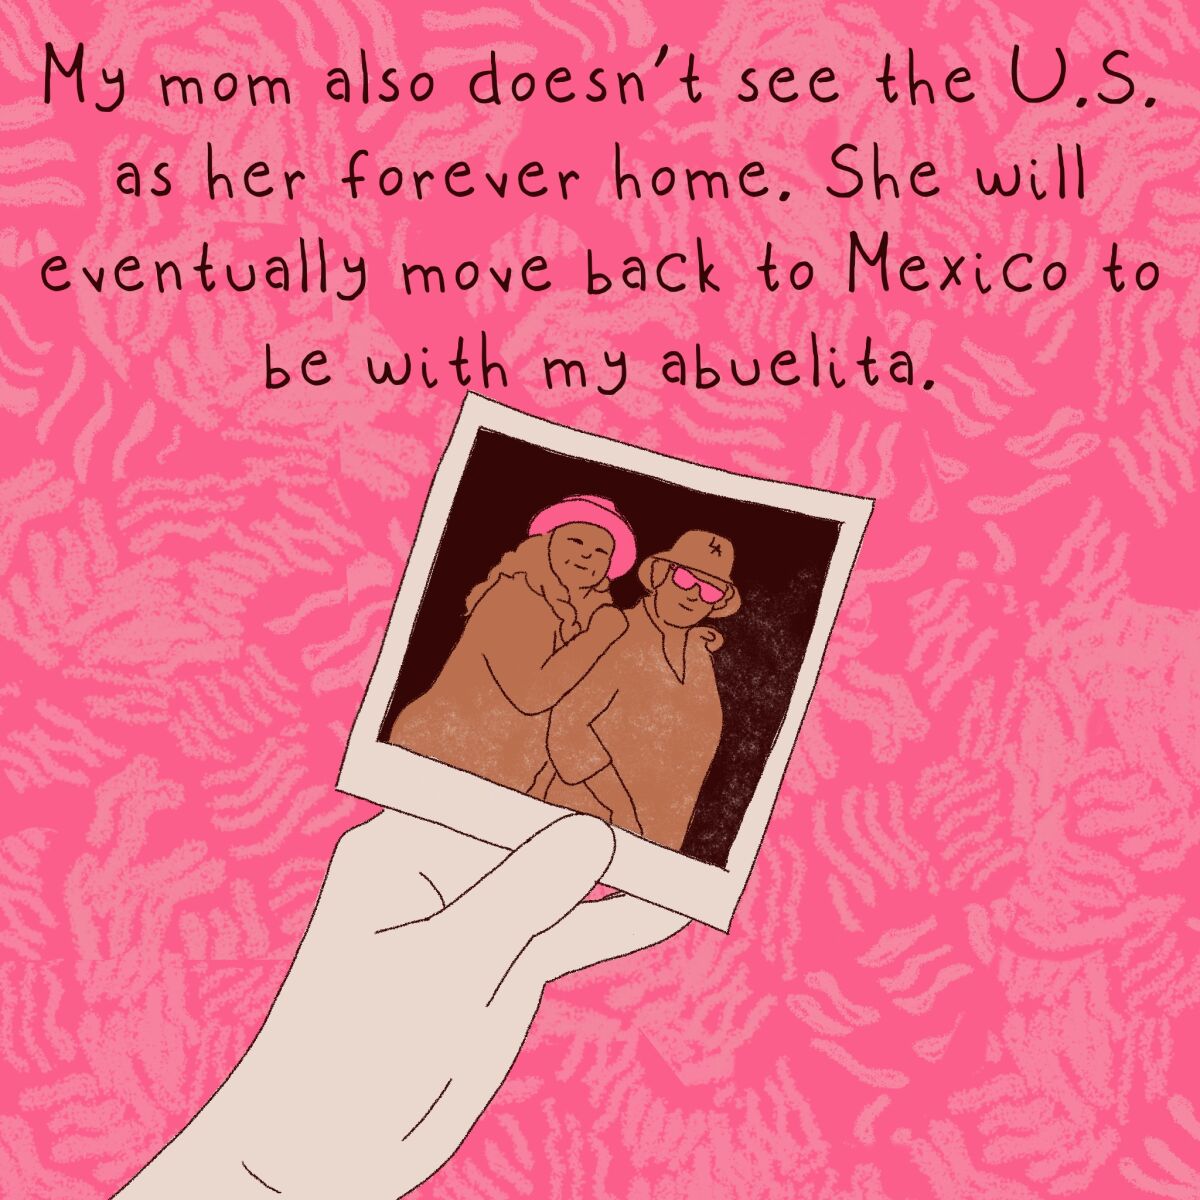 My mom also doesn't see the U.S. as her forever home. She will eventually move back to Mexico to be with my abuelita. 